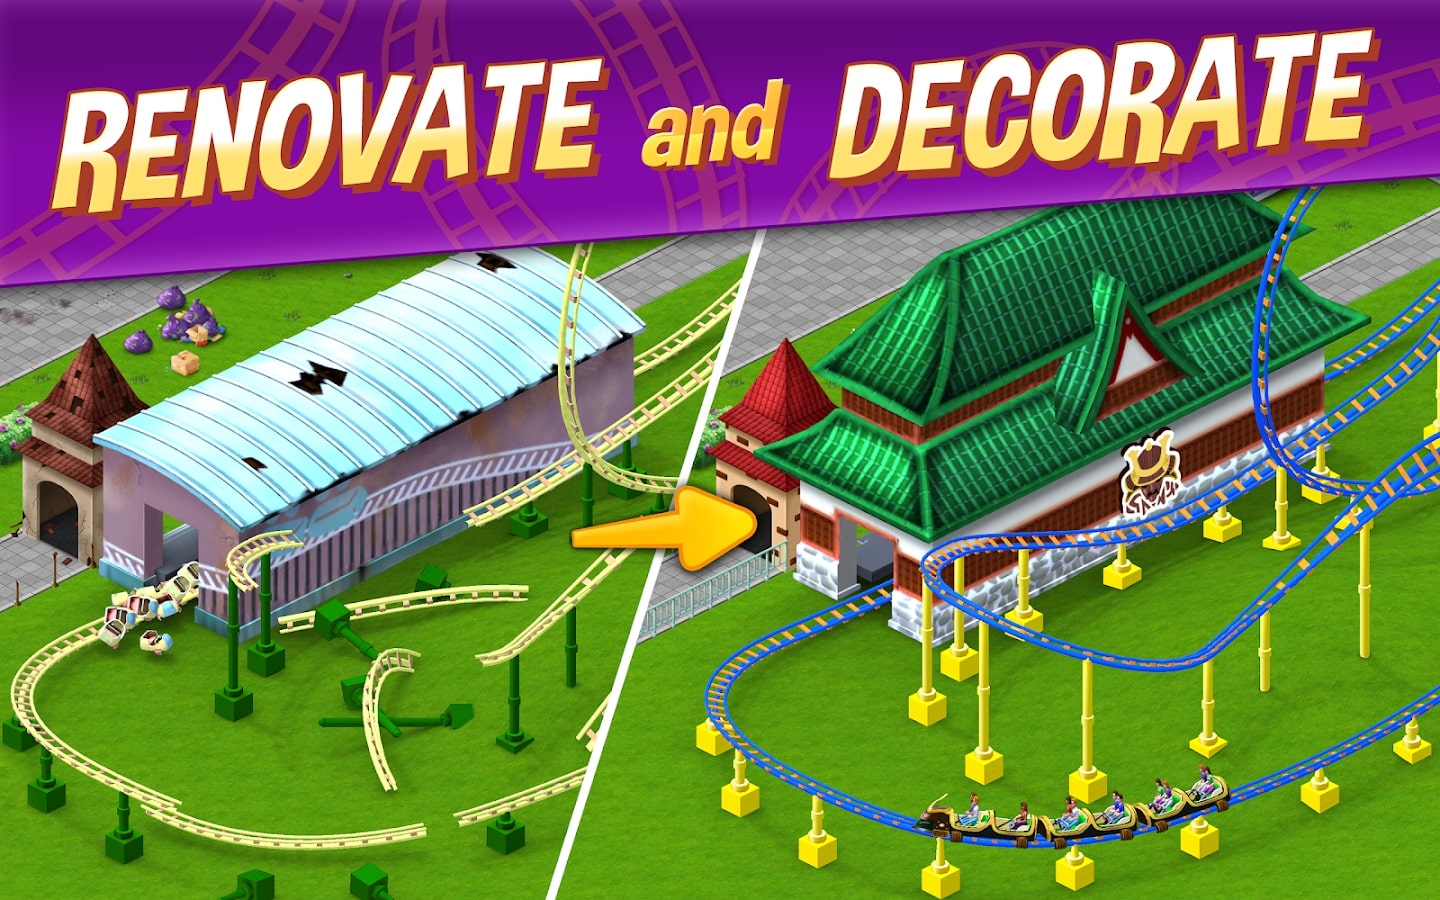 rollercoaster tycoon deluxe flat map